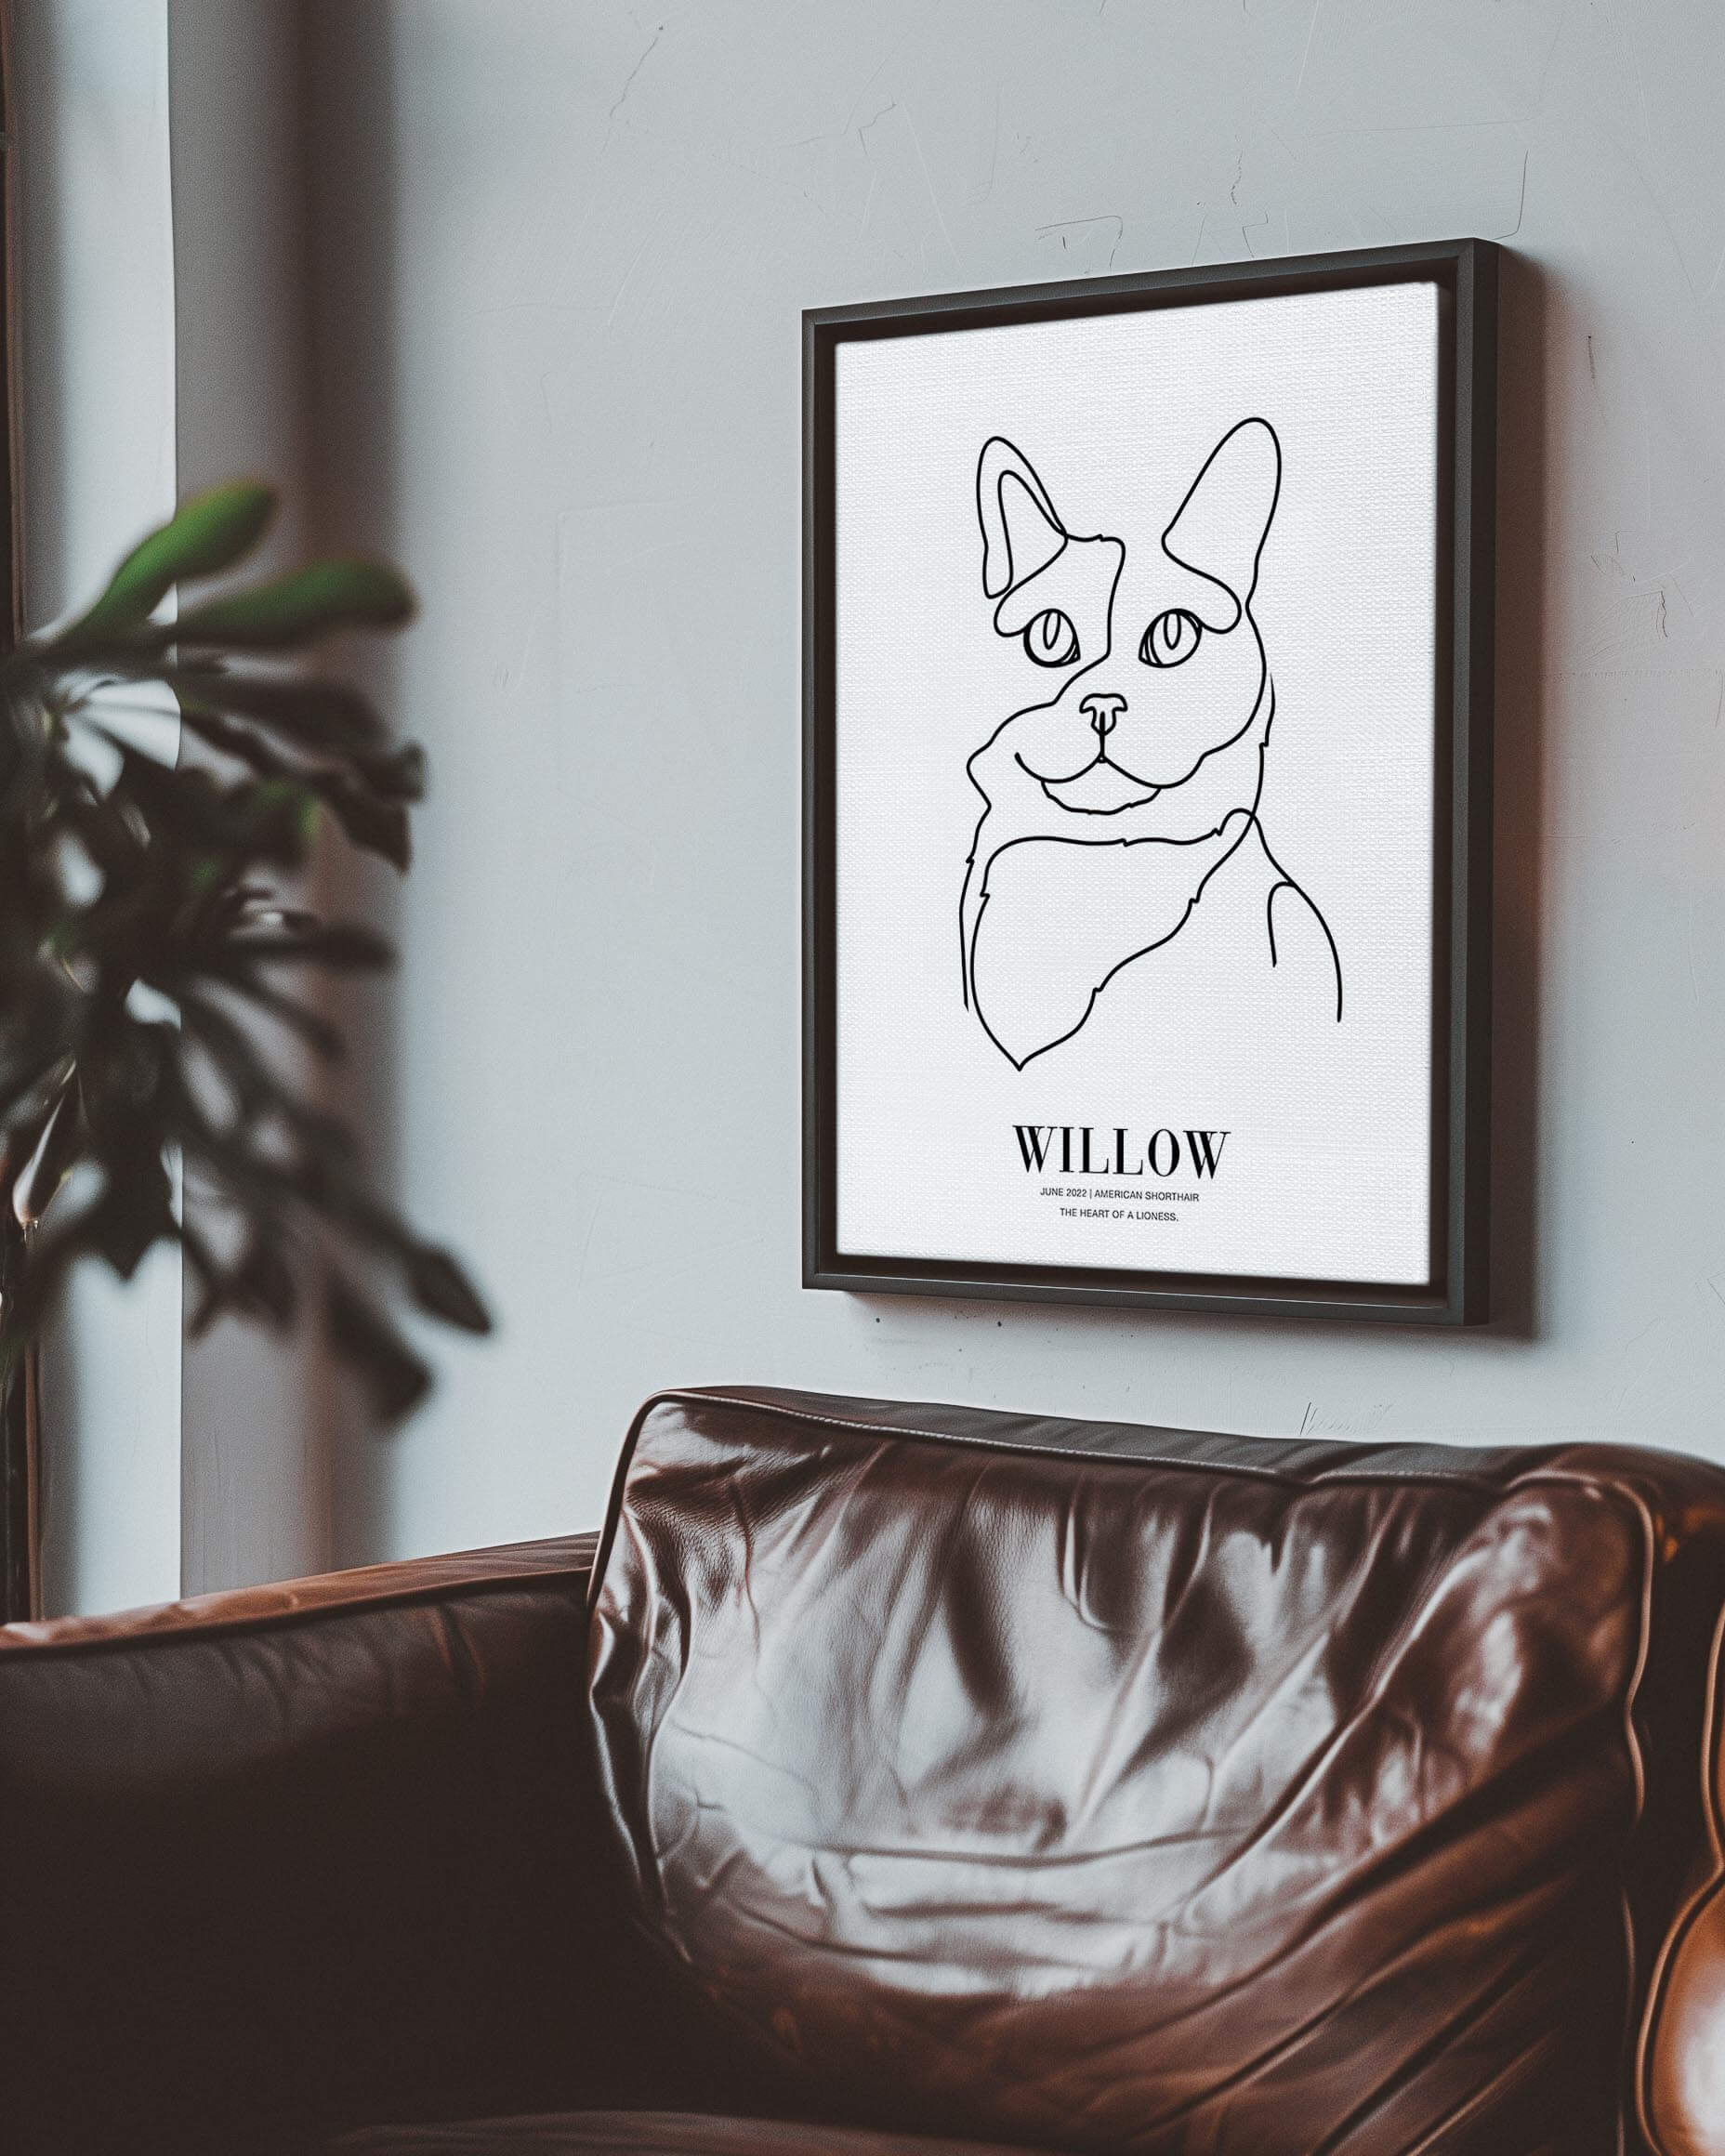 cat art print line drawing custom art on canvas and mounted on wall of contemporary home decor living space creating a unique custom gift idea for dog mom and dog dad pet parents made by vogue paws personalized pet portrait dog art